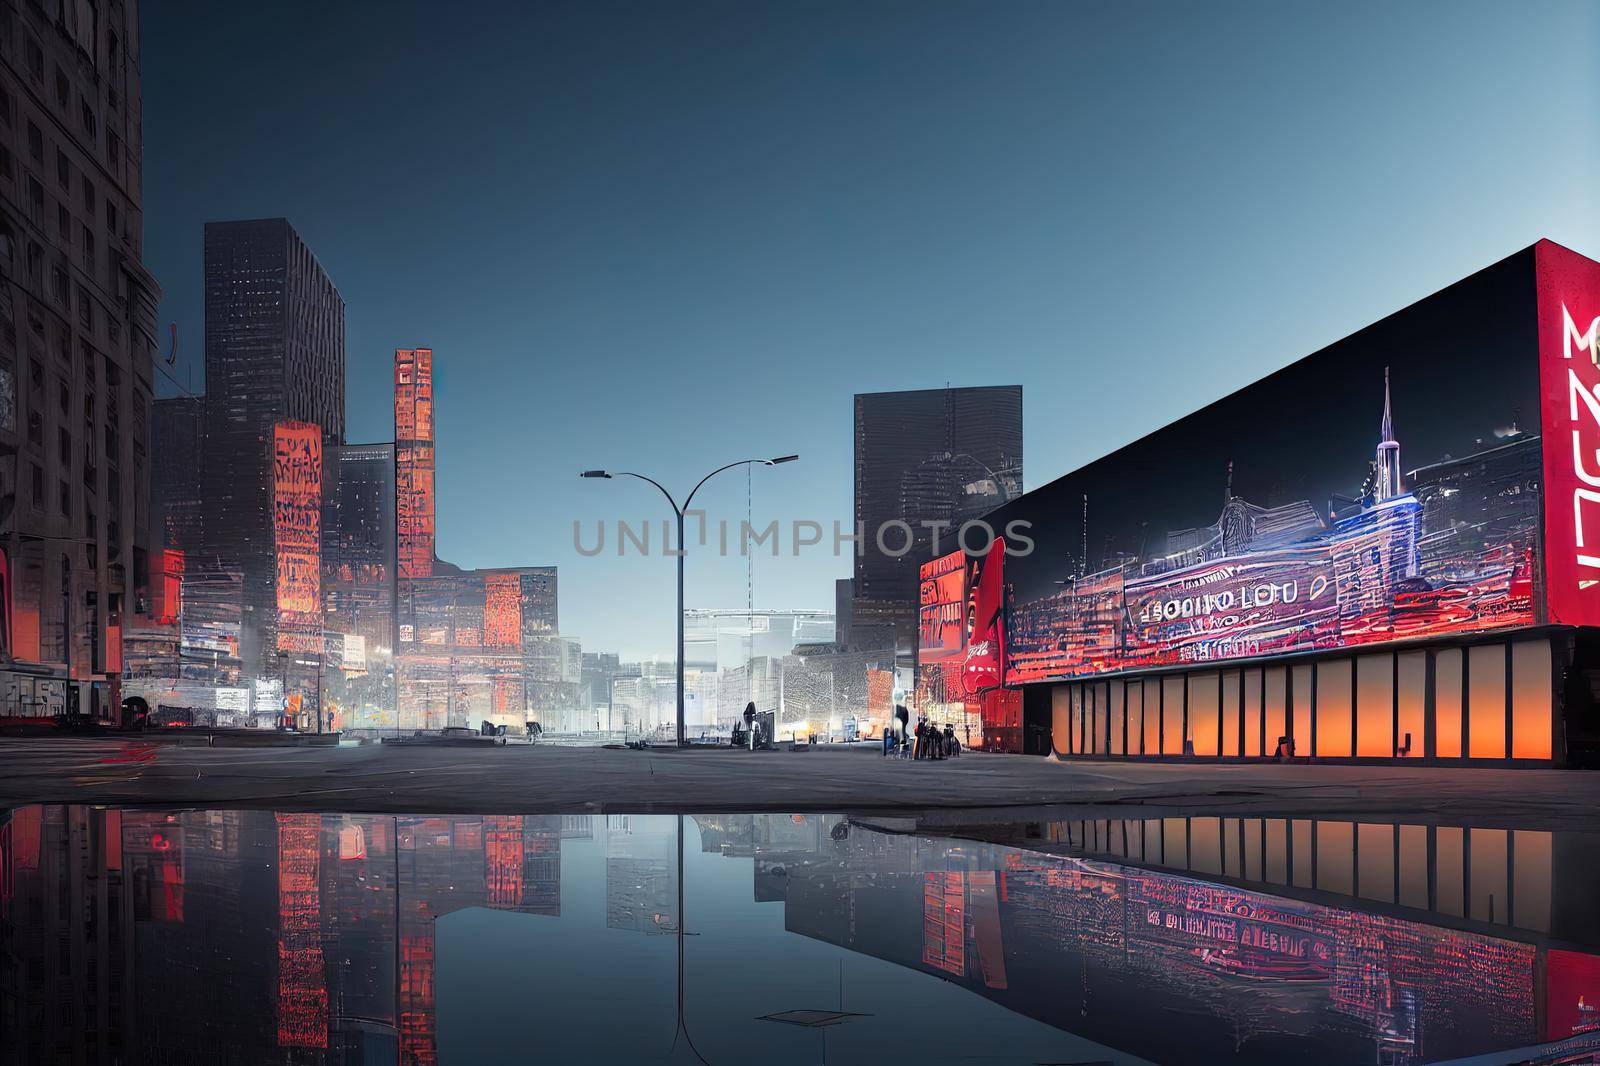 3D Rendering of billboards and advertisement signs at modern buildings in capital city with light reflection from puddles on street. Concept for night life, never sleep business district center CBD. High quality illustration